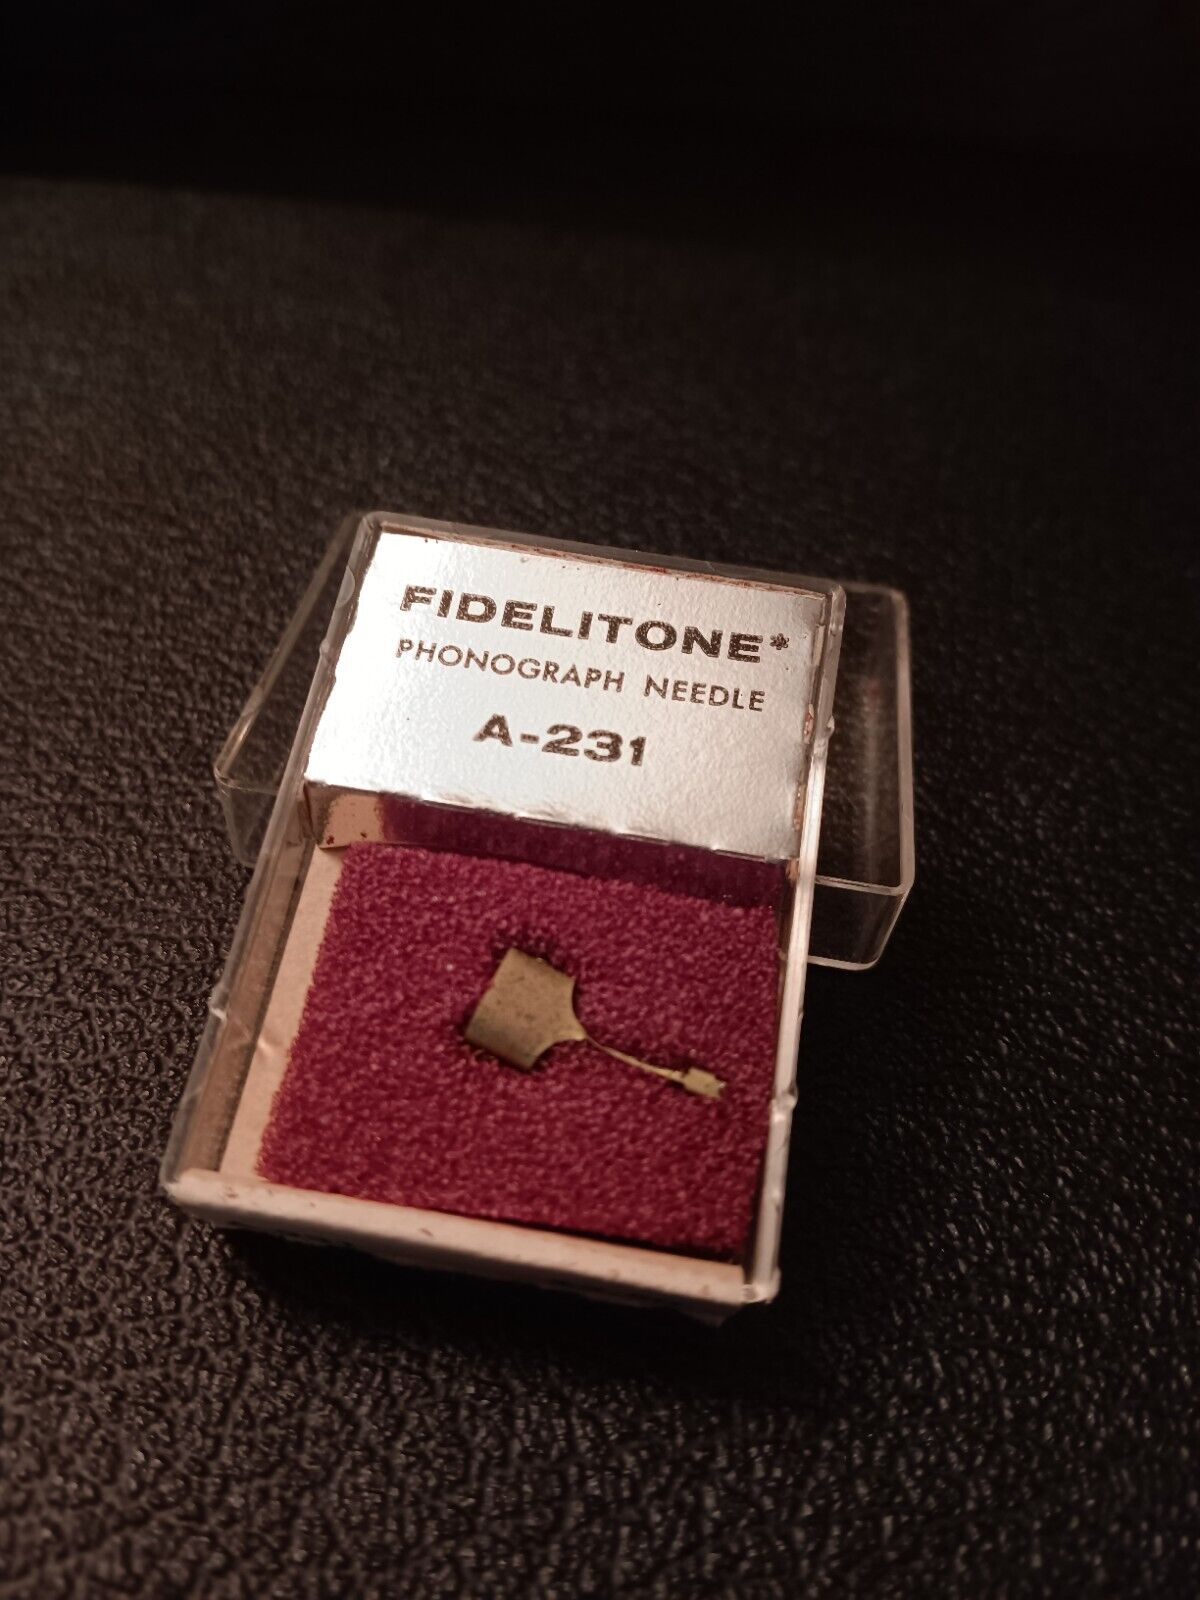 Vintage Fidelitone Phonograph Needle 33 1/3 - 45rpm A-231 New Old Stock